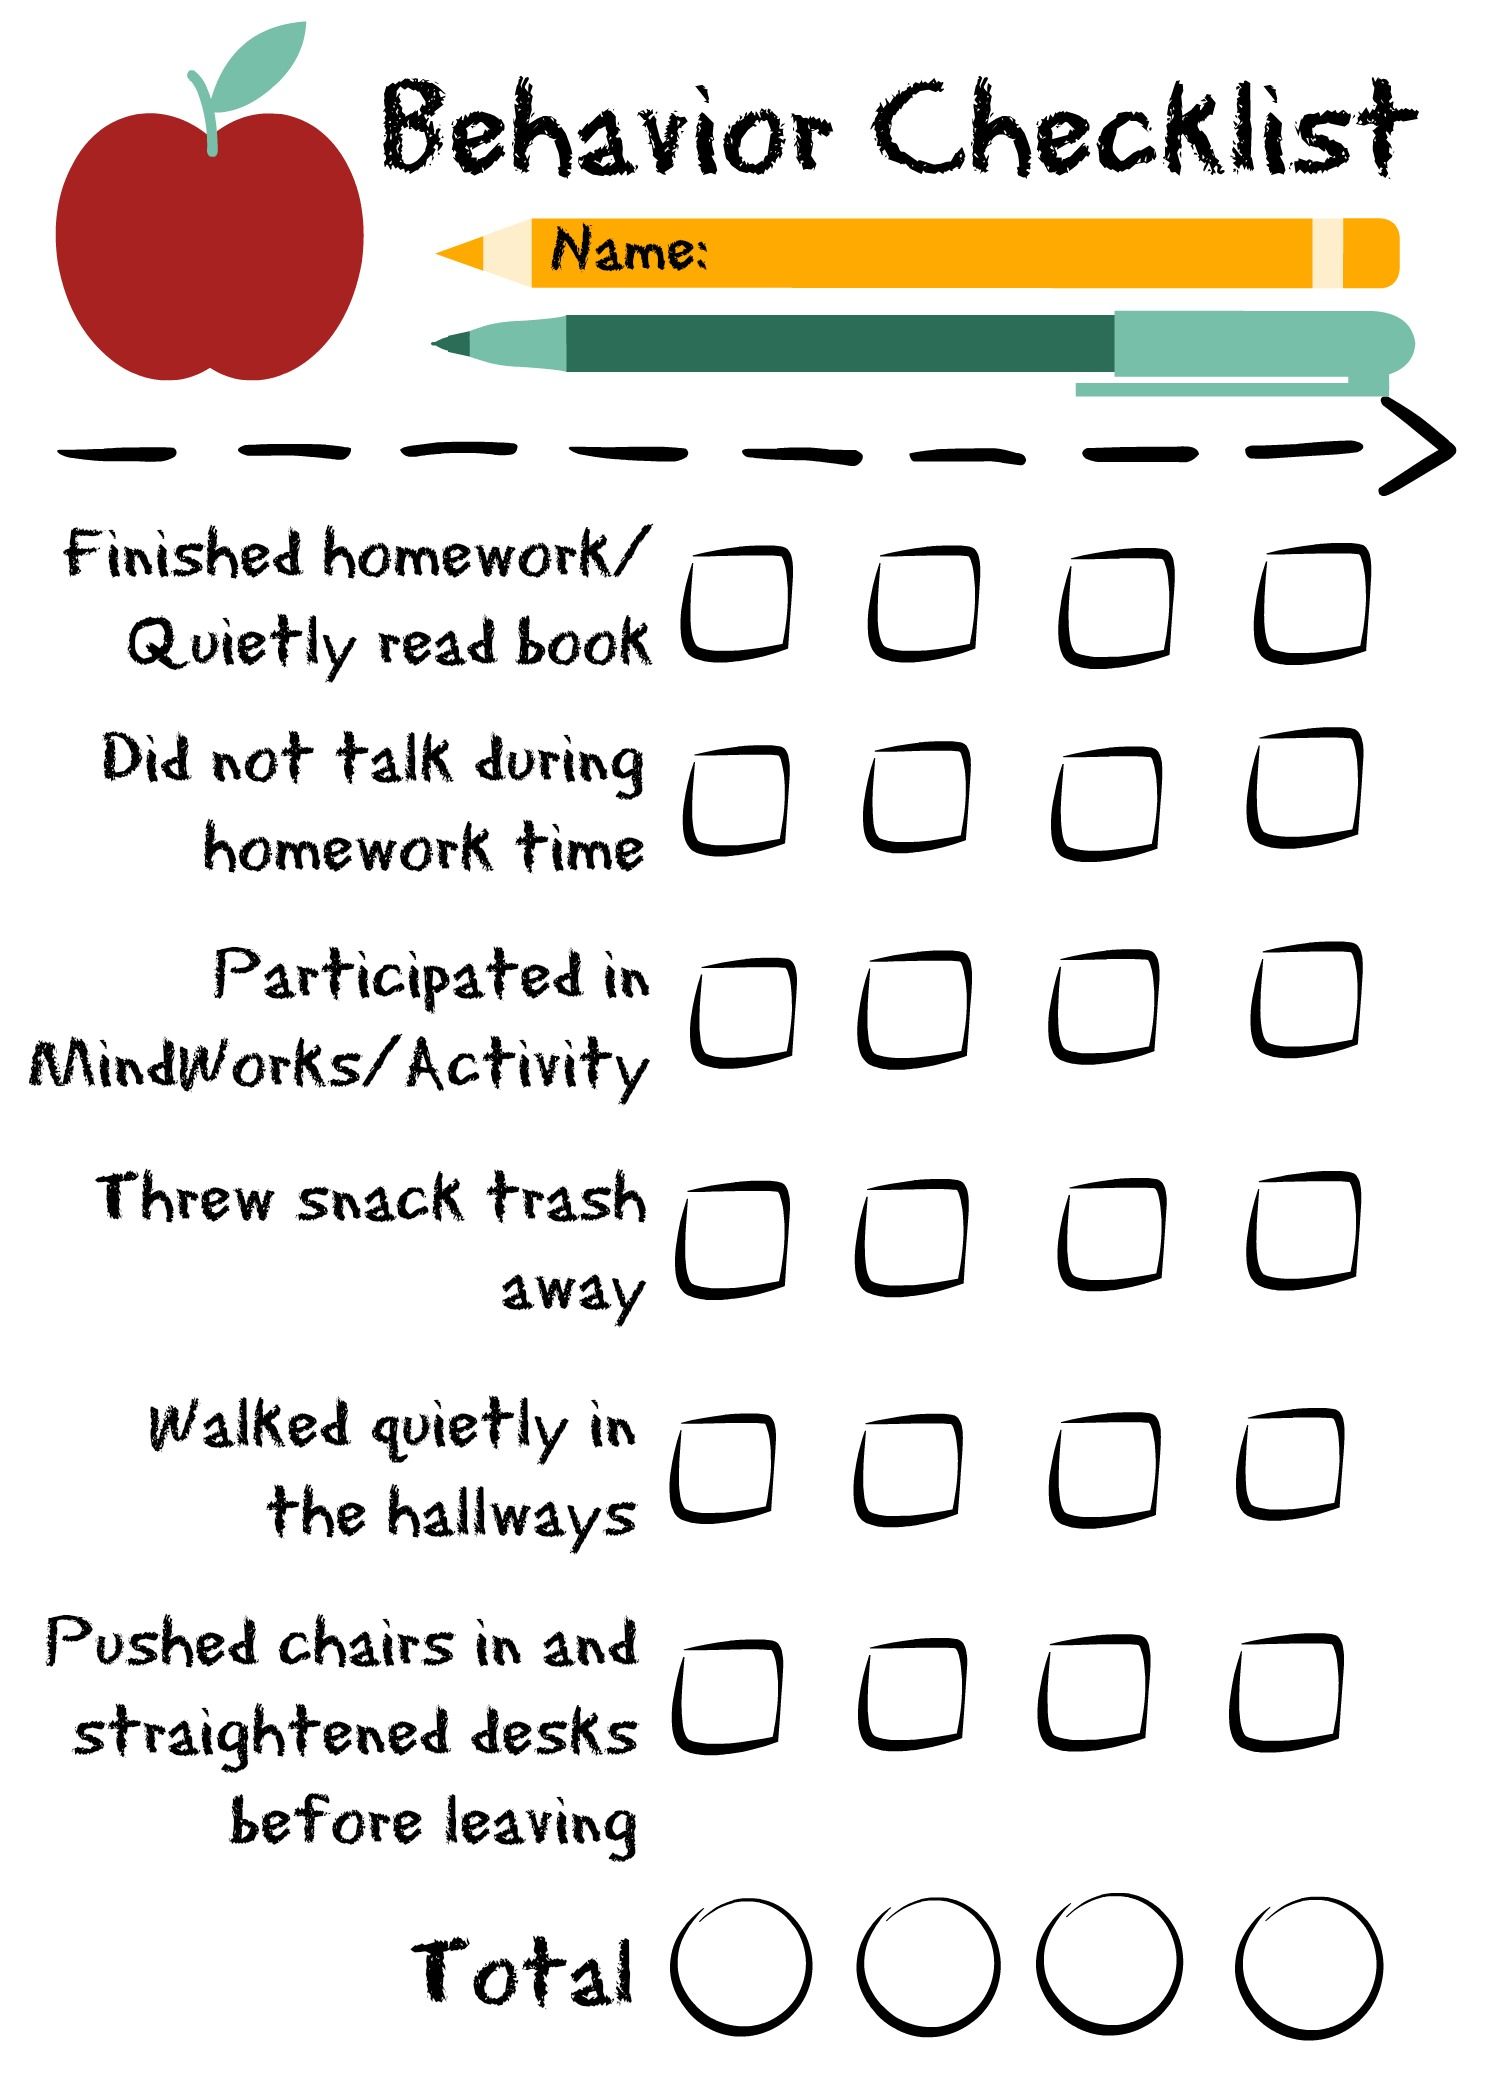 Behavior Checklist for the classroom! Good for students in 